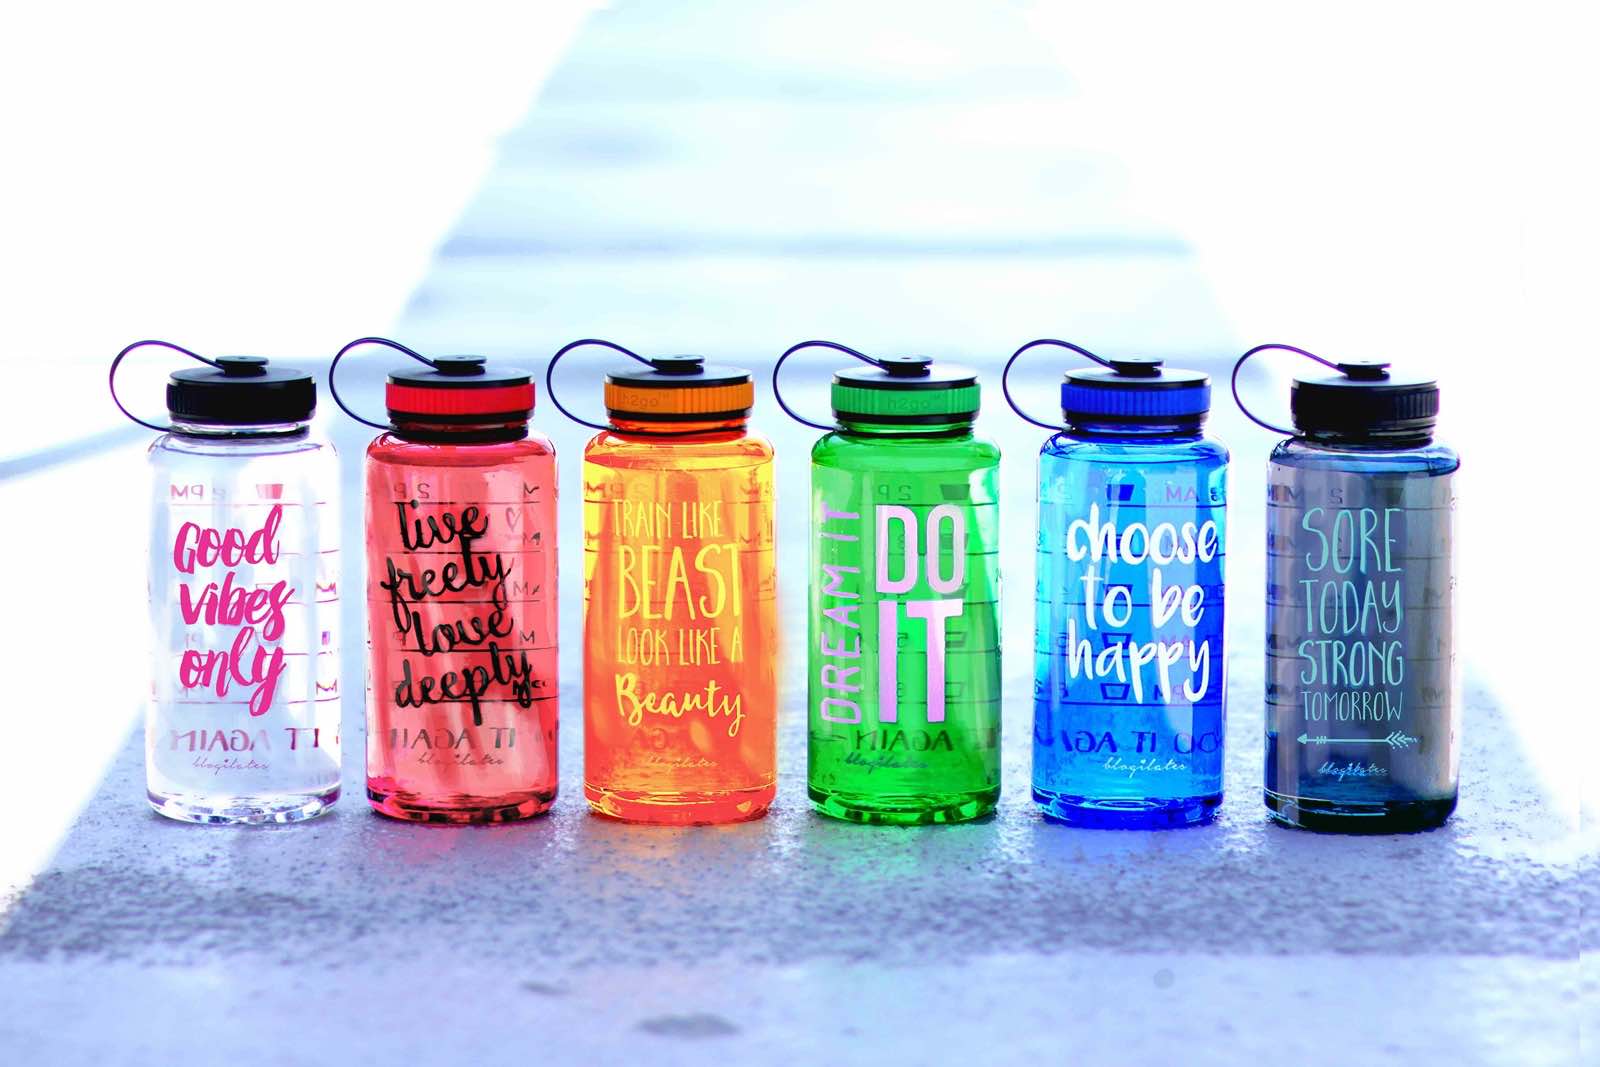 Blogilates - If you had to pick one bottle to take home